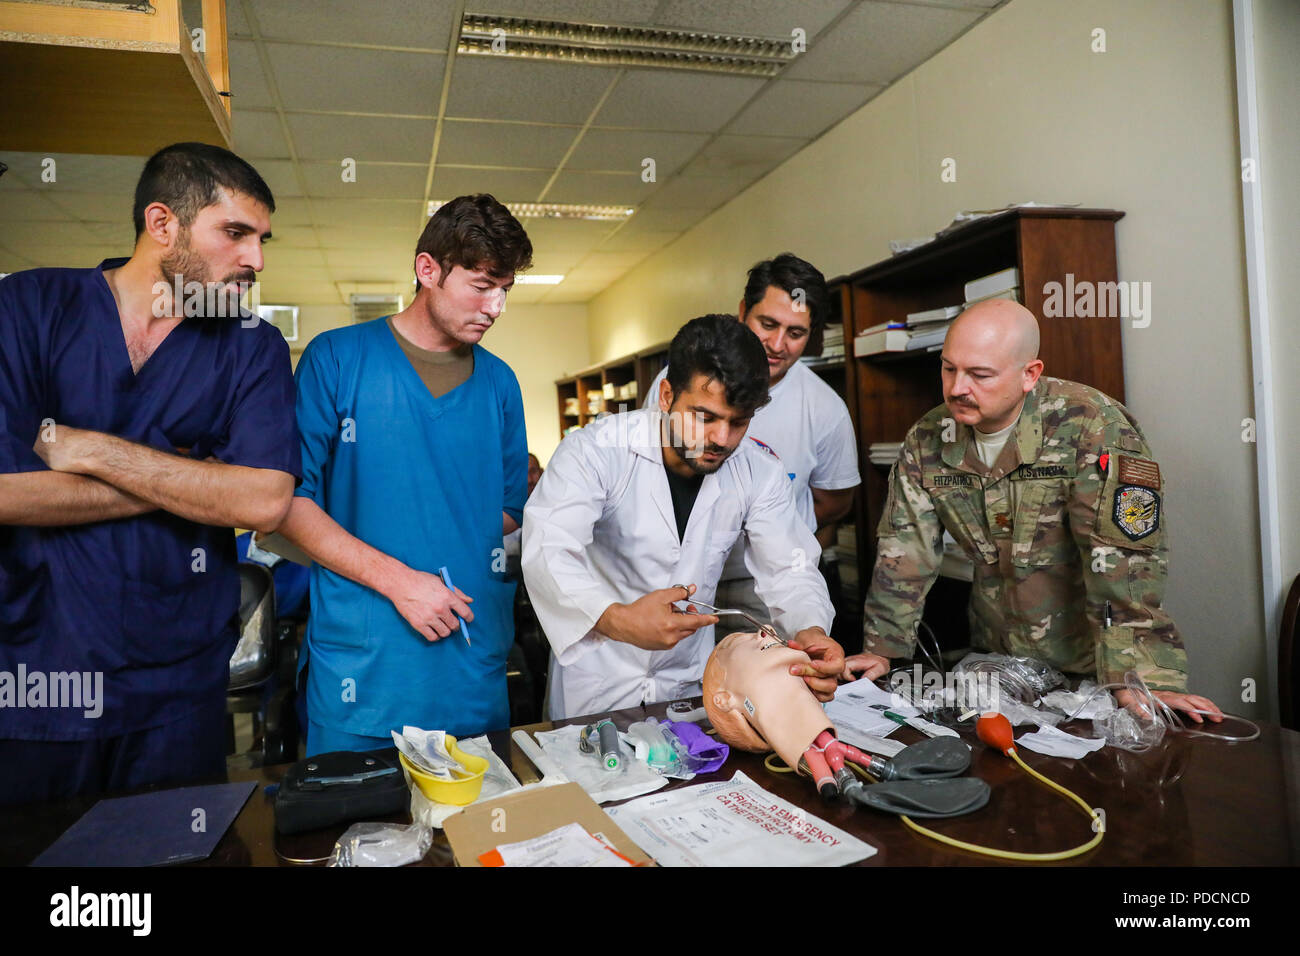 KANDAHAR PROVINCE, Afghanistan (August 5, 2018) -- U.S. Navy Lt. Cdr. Travis J. Fitzpatrick, senior nurse for Kandahar Airfield NATO Role III Multinational Medical Unit, observes as Afghan medical staff members demonstrate how to open an airway, August 5, 2018, during a medical advisory visit at Kandahar Regional Military Hospital, Camp Hero in Kandahar, Afghanistan. Staff members from the Role III conduct routine visits to KRMH to train and advise Afghan medical staff. (U.S. Army photo by Staff Sgt. Neysa Canfield/TAAC-South Public Affairs) Stock Photo